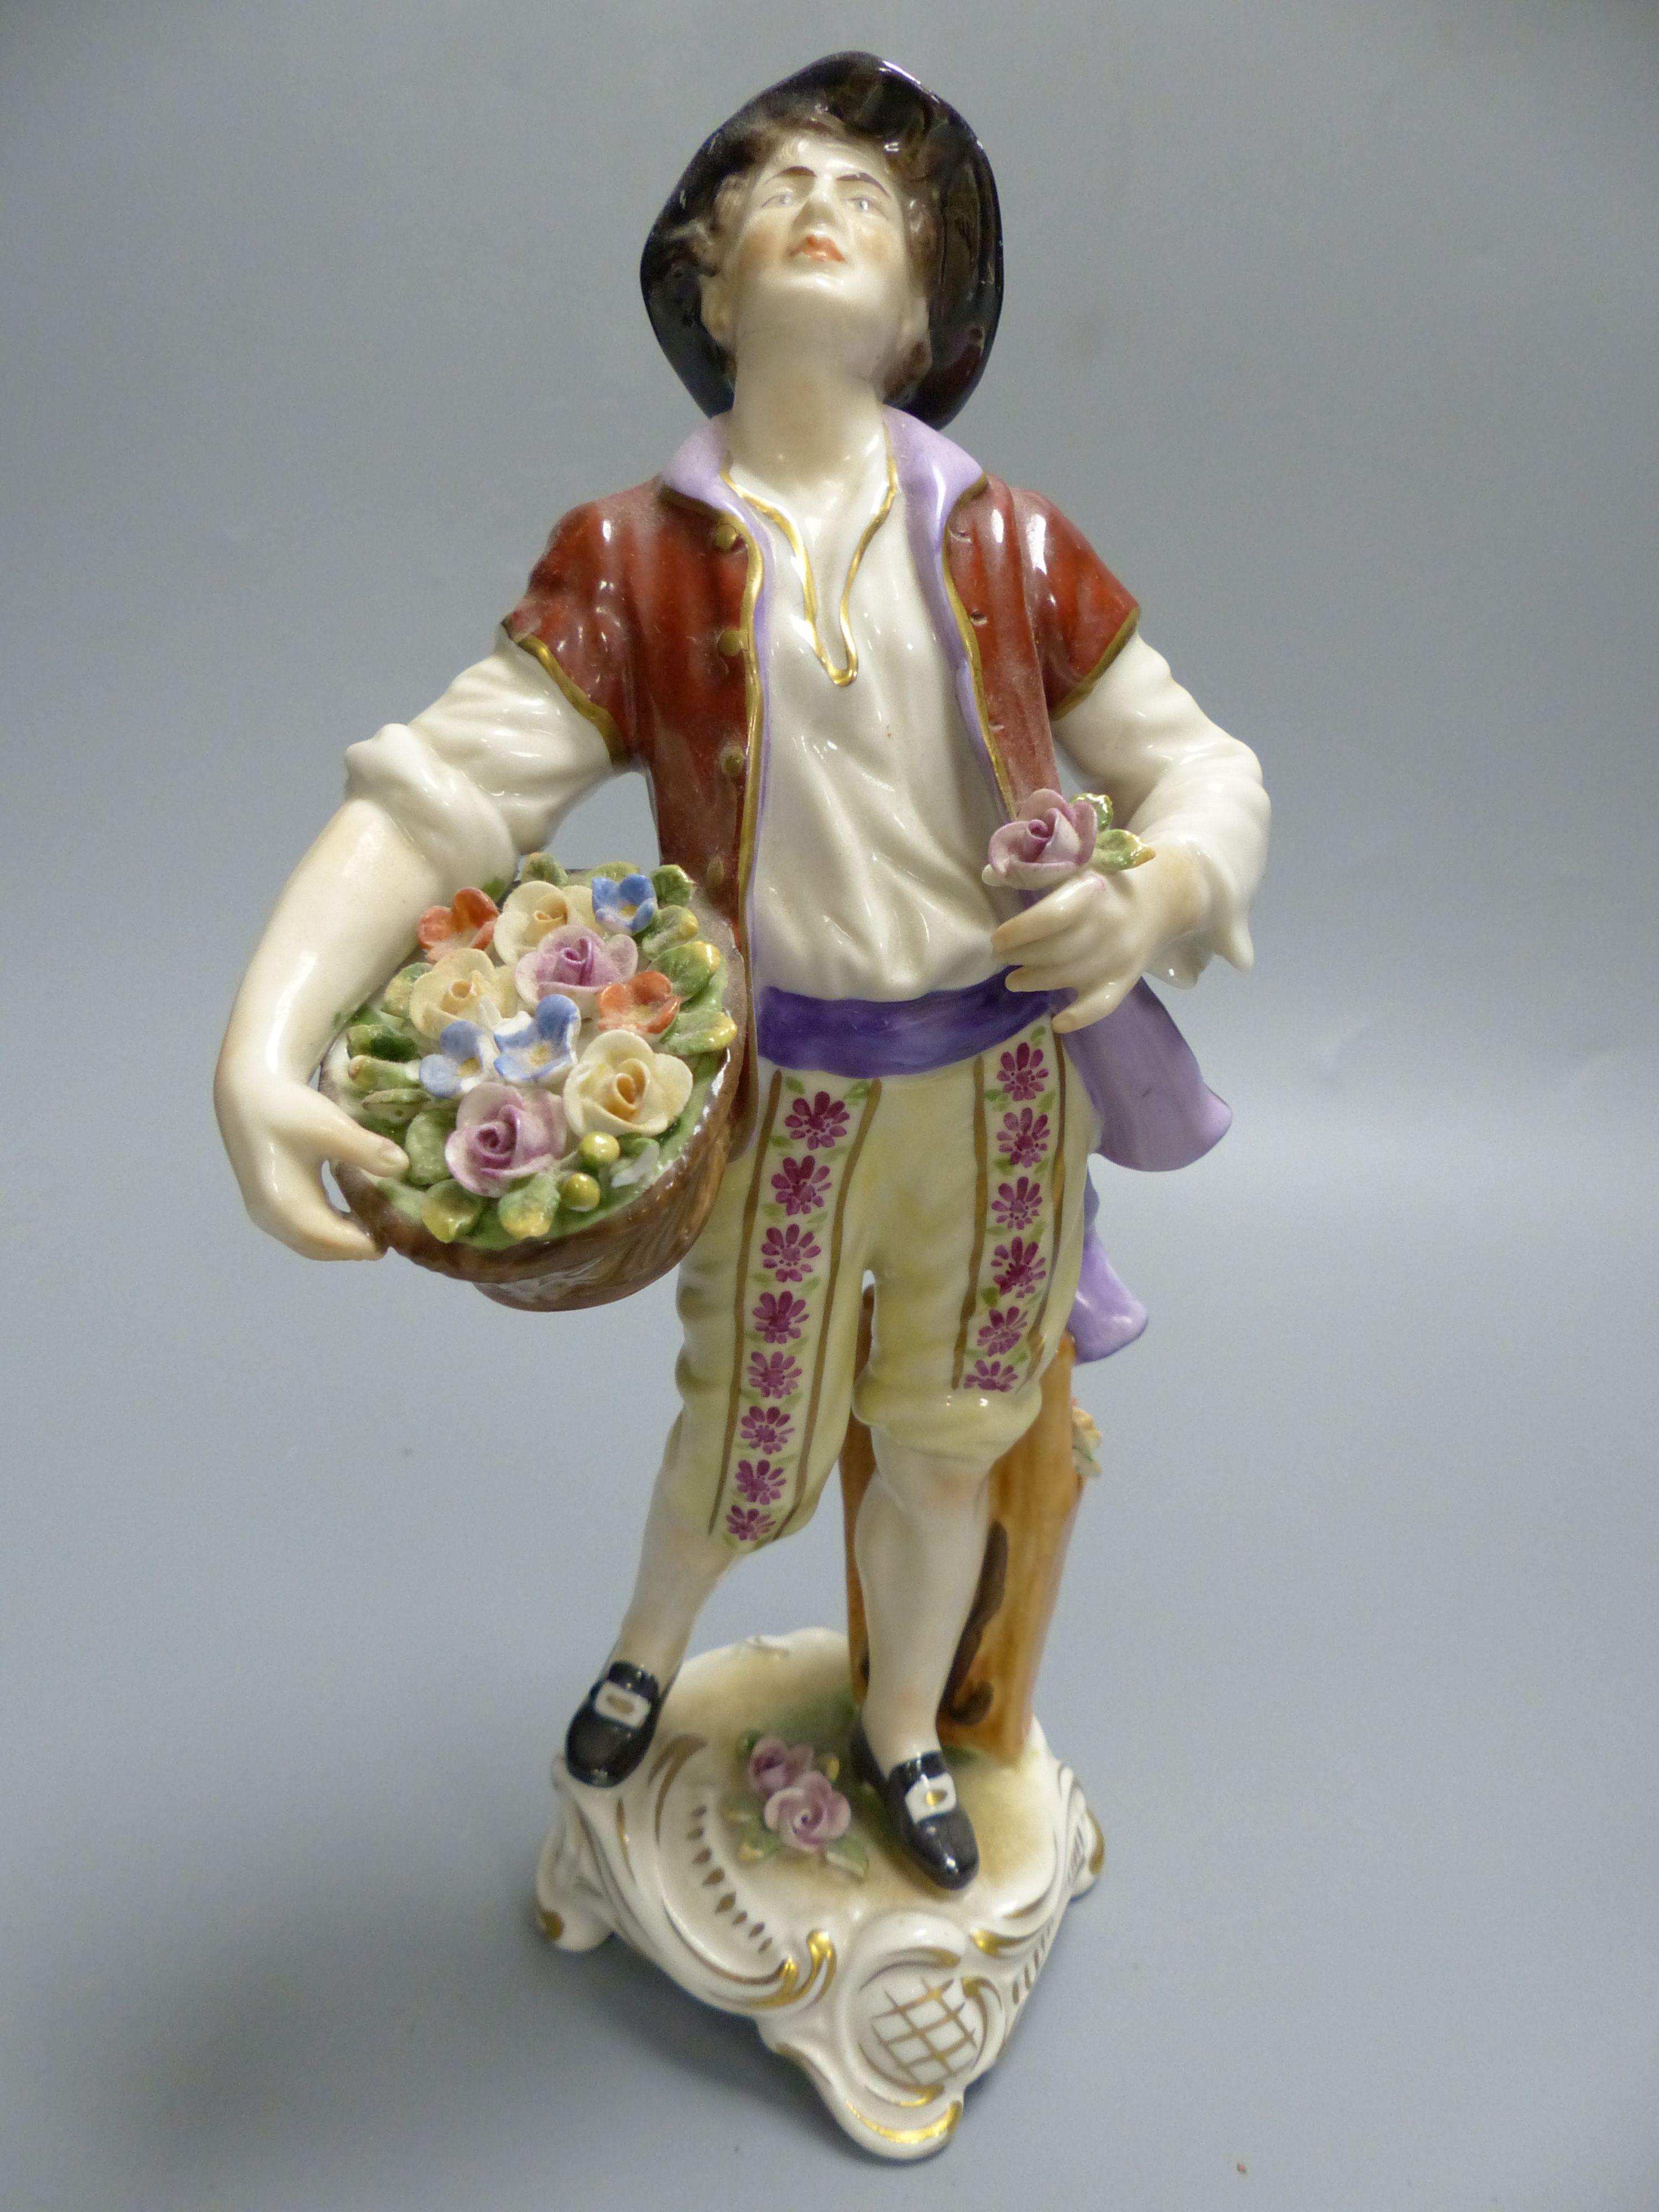 A pair of Rudolf Kammer porcelain figures of flower carriers, height 23cm